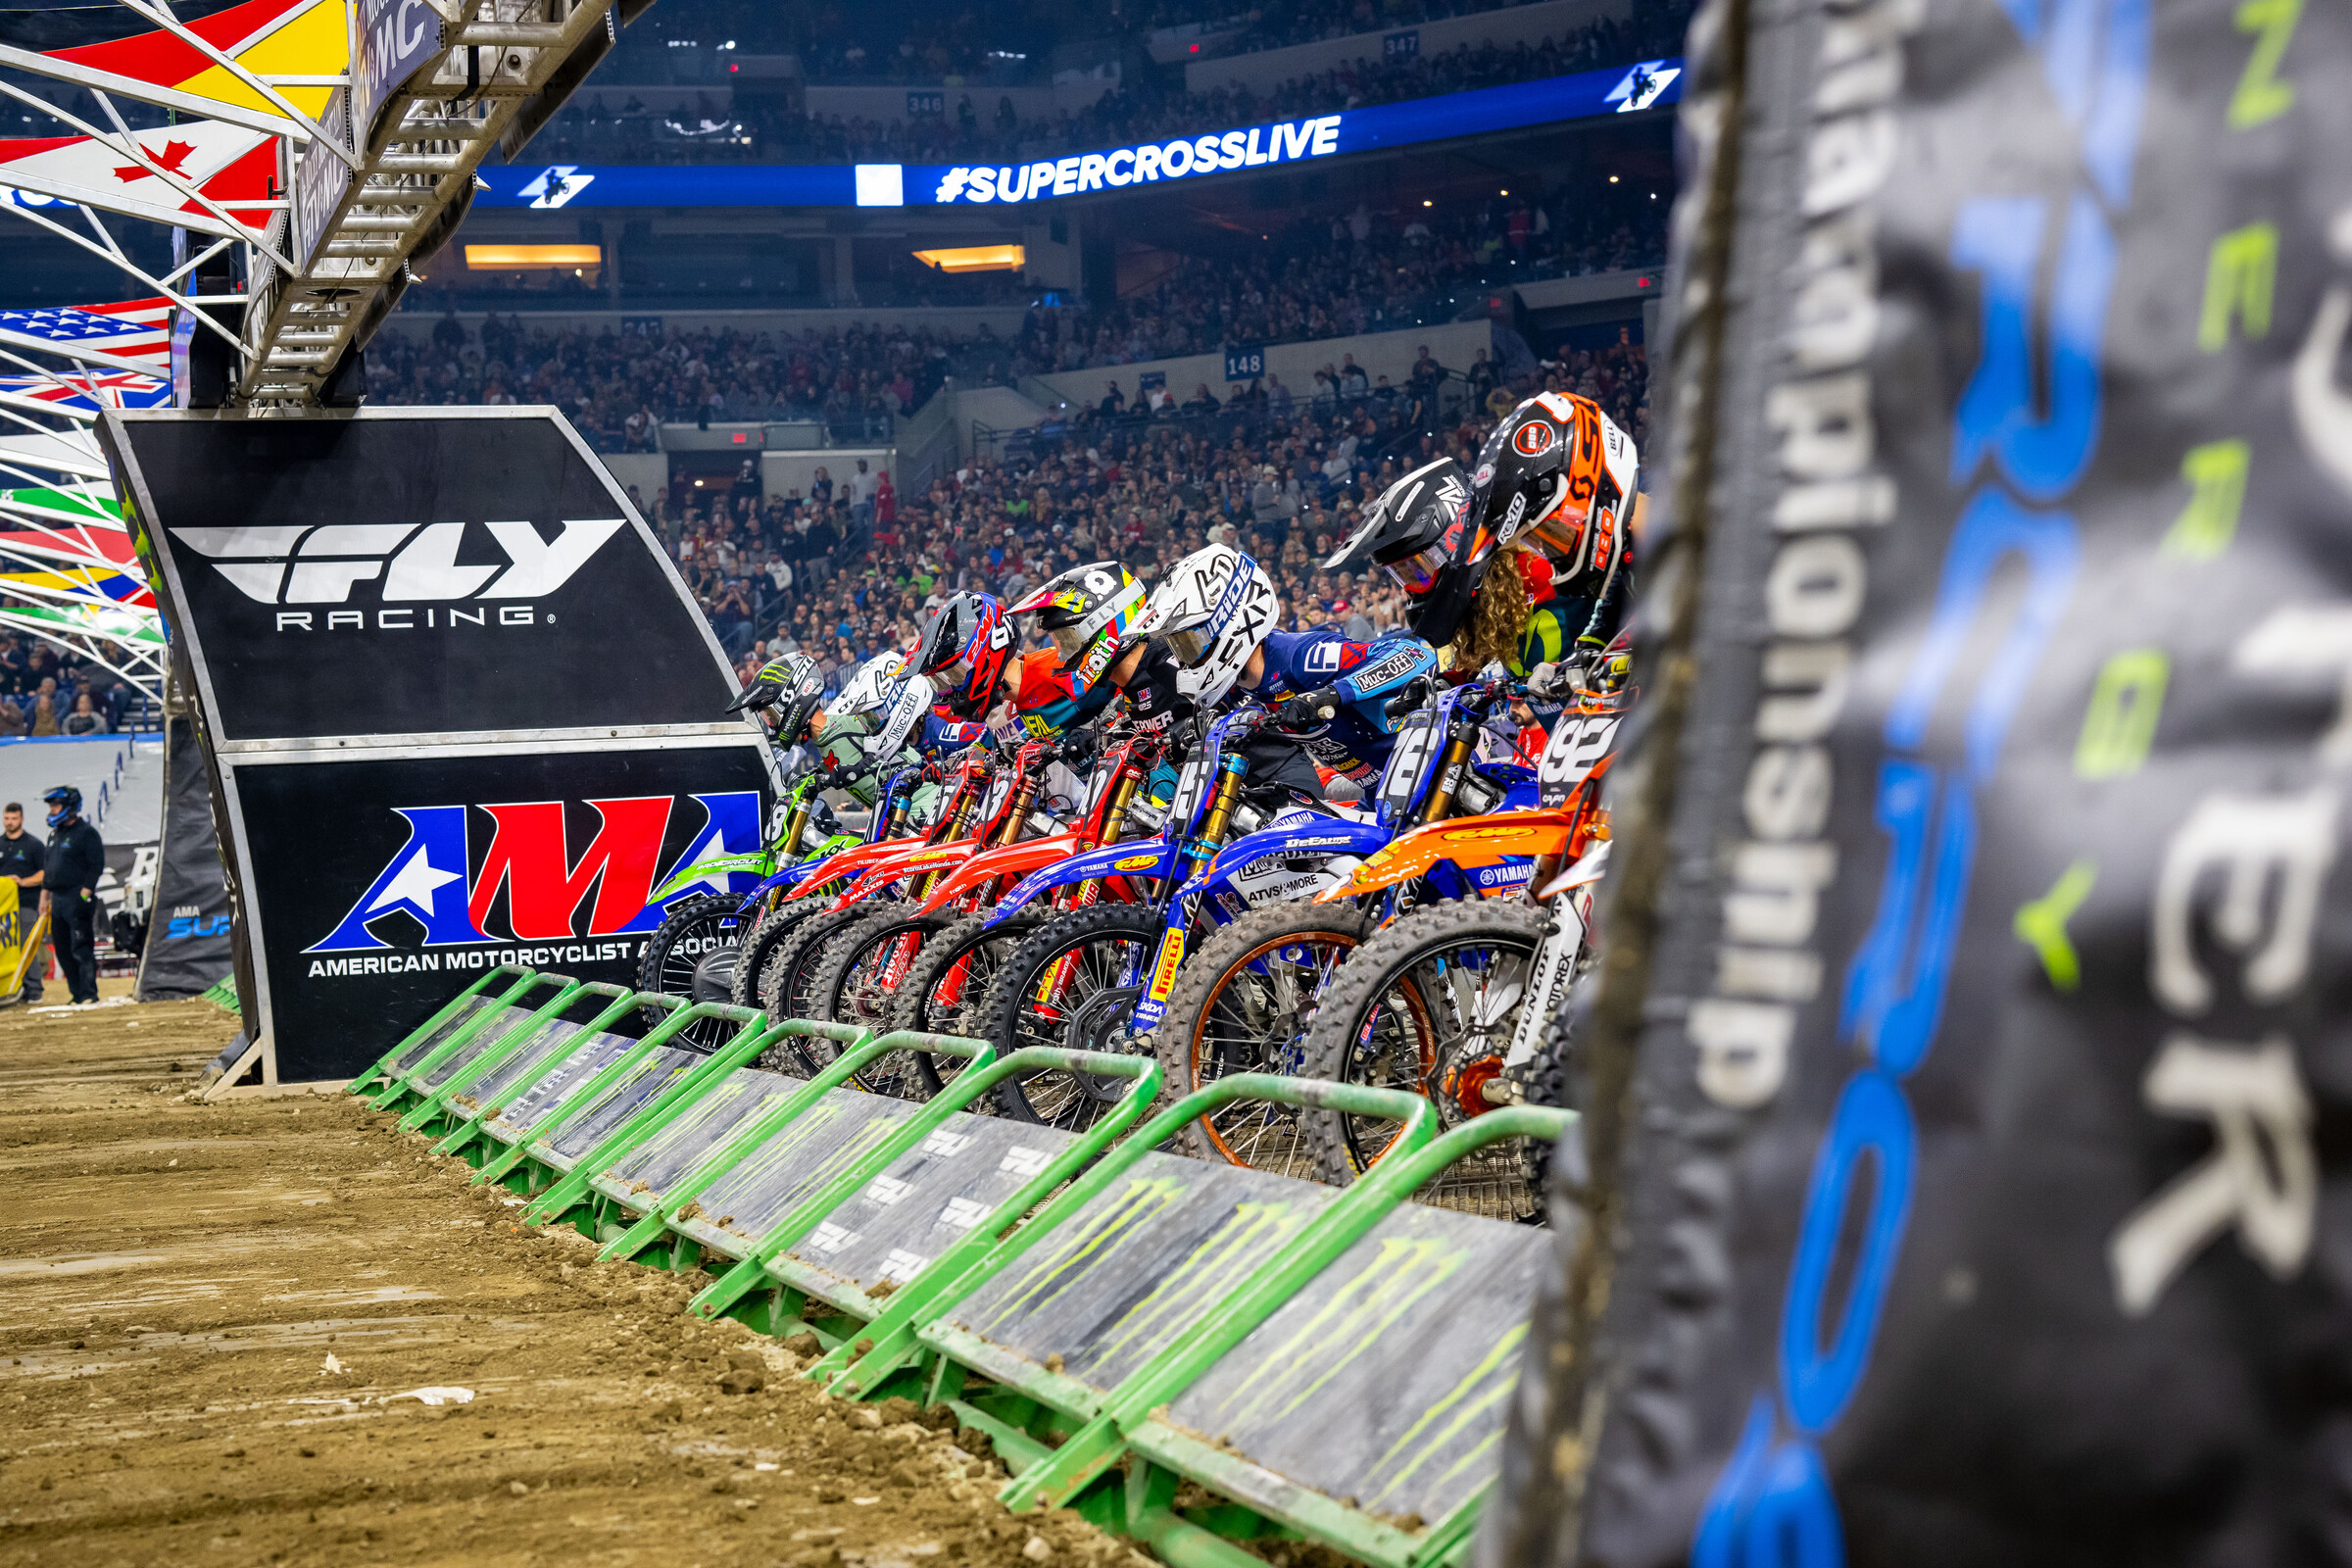 How to Watch Indianapolis SX, The General GNCC, and MXGP of Patagonia-Argentina on TV